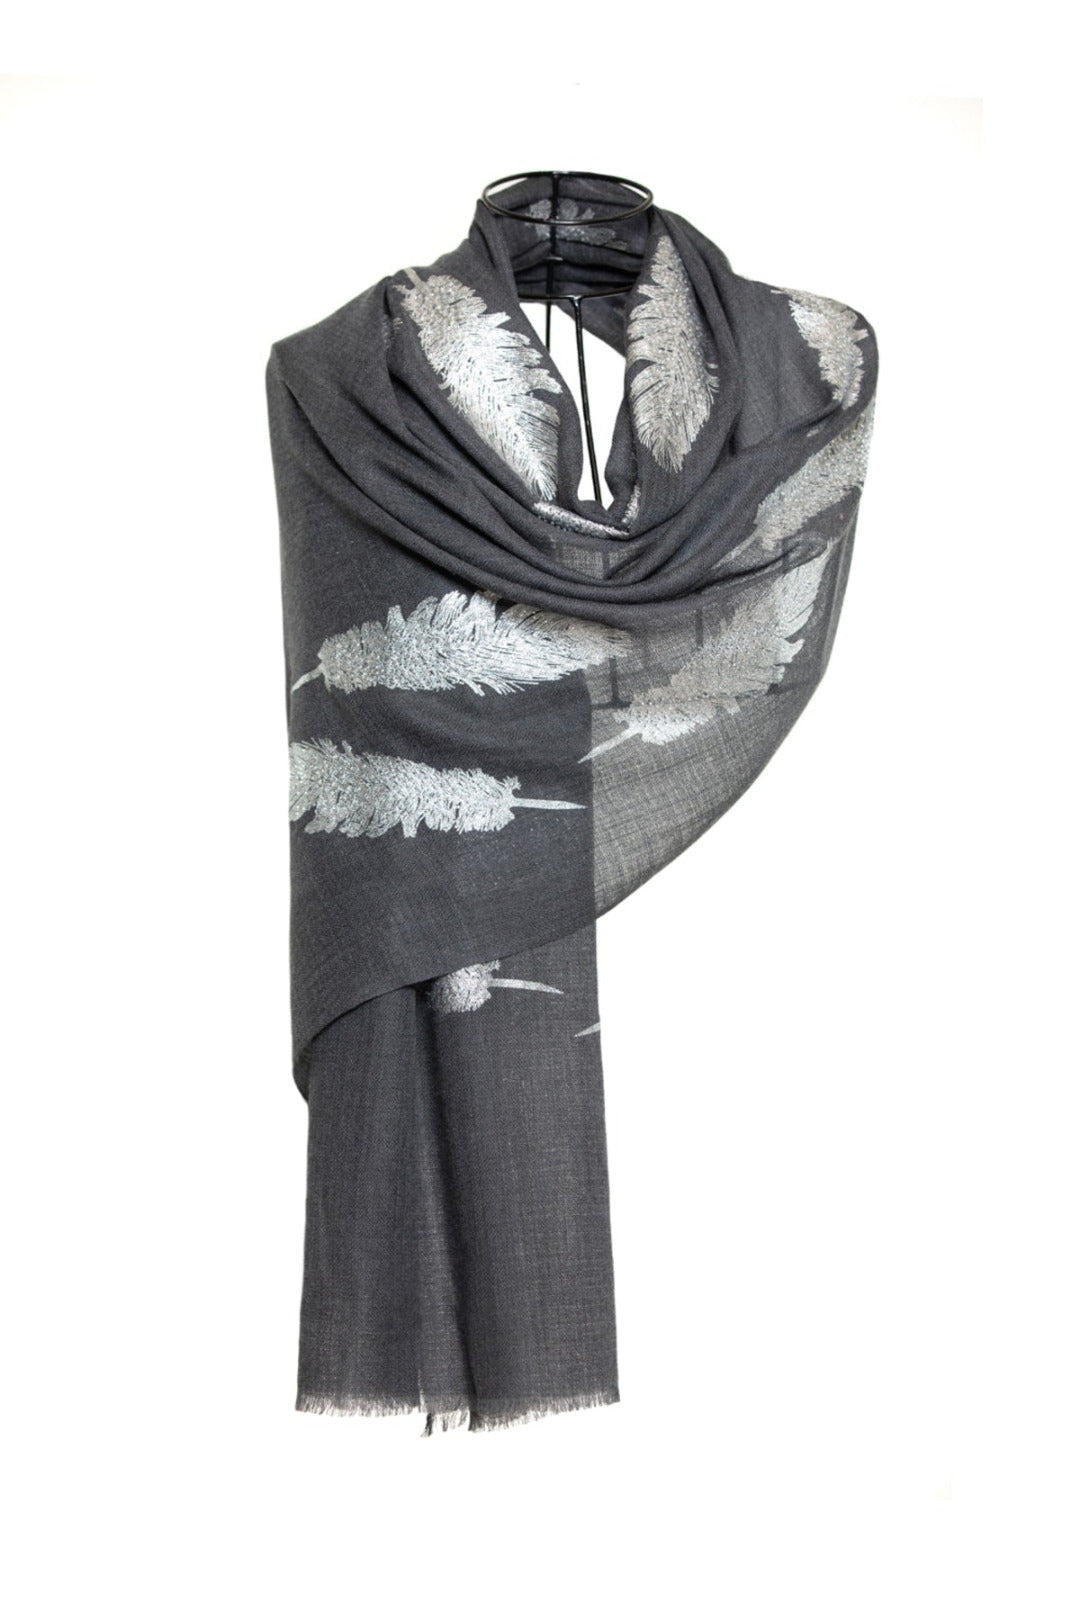 Angel Feathers Crystal Feathers Shawl Stole - Charcoal Silver